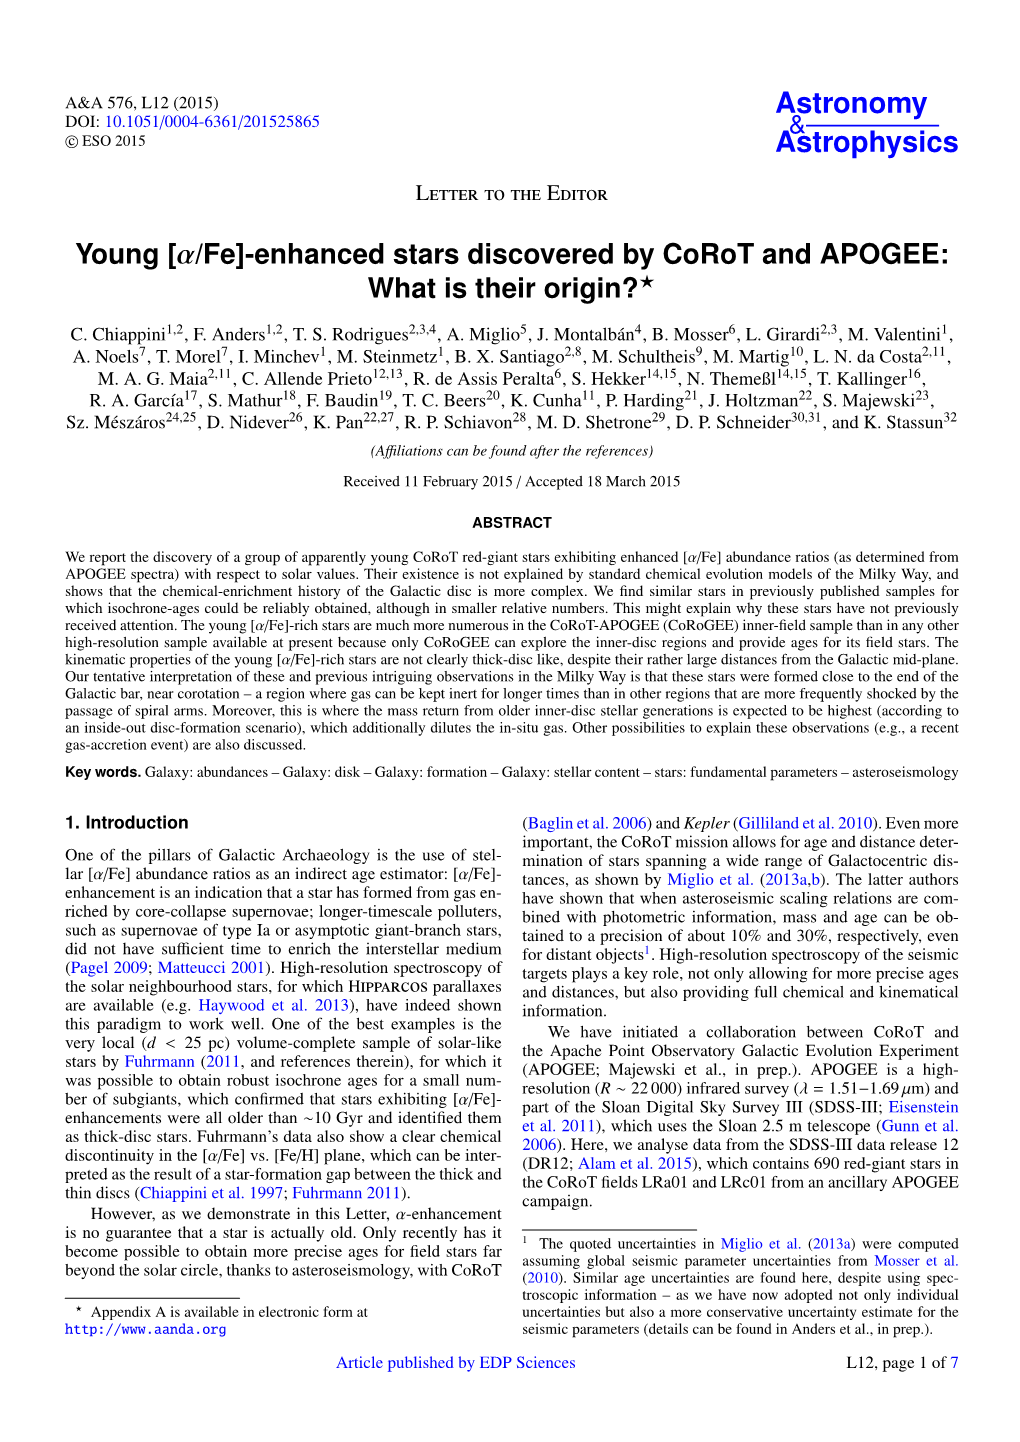 Young \[Α/Fe\]-Enhanced Stars Discovered by Corot and APOGEE